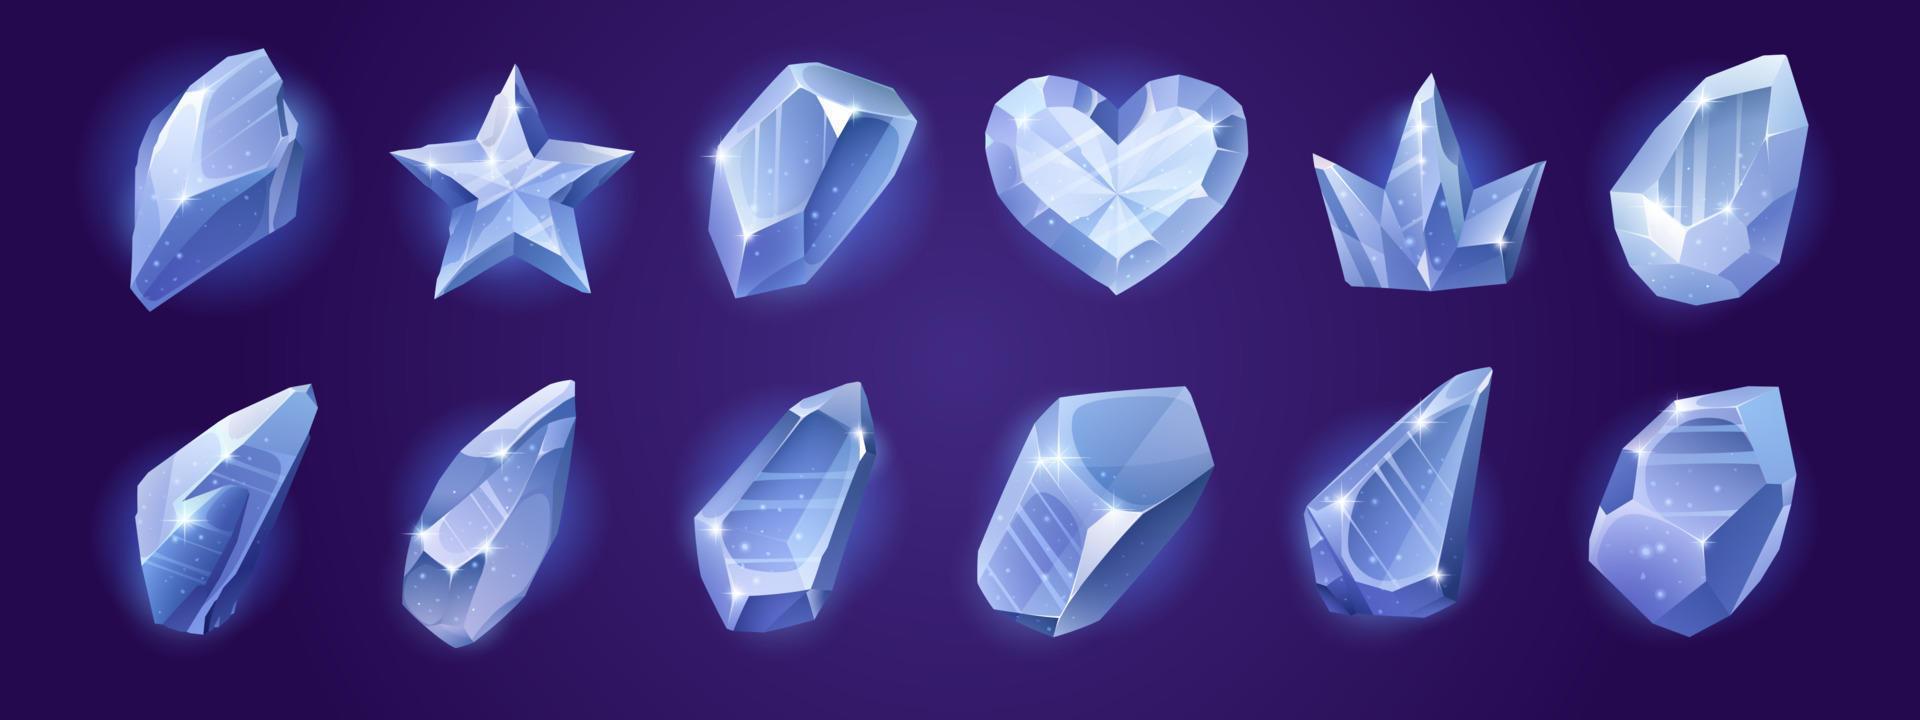 Game icons of diamond crystals, blue shiny gems vector